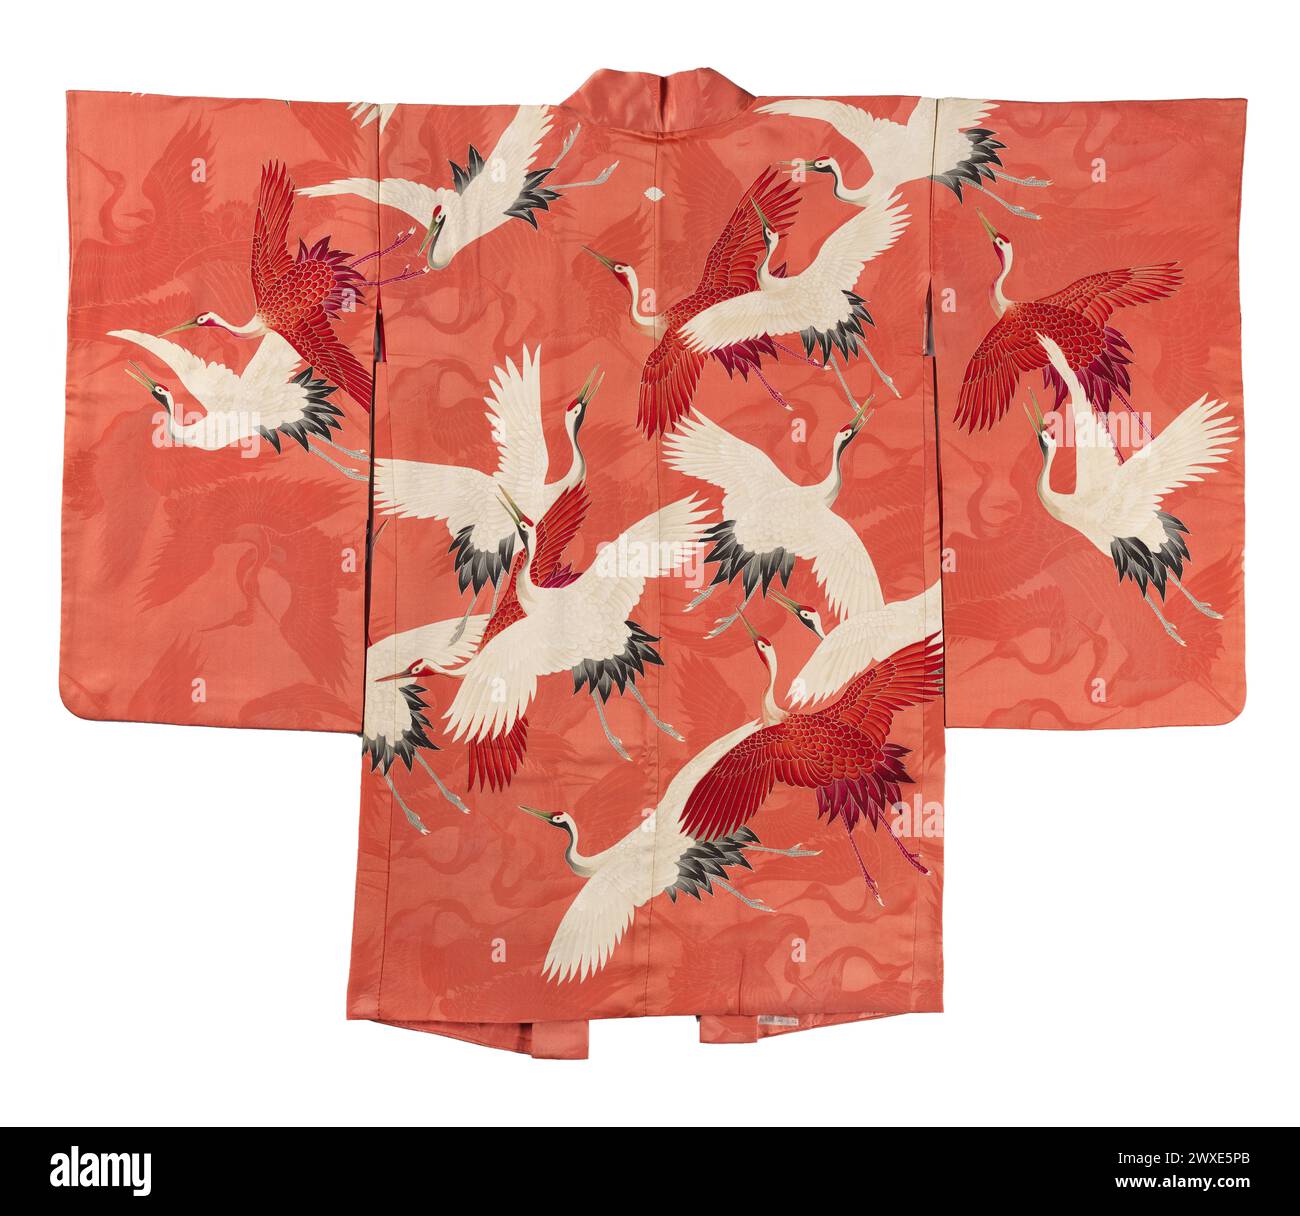 Japanese Furisode kimono with a Myriad of Flying Cranes, anonymous, 1910 - 1930   Formal long-sleeved kimono for an unmarried young woman (furisode), decorated all over with flying cranes.   Japan silk Stock Photo